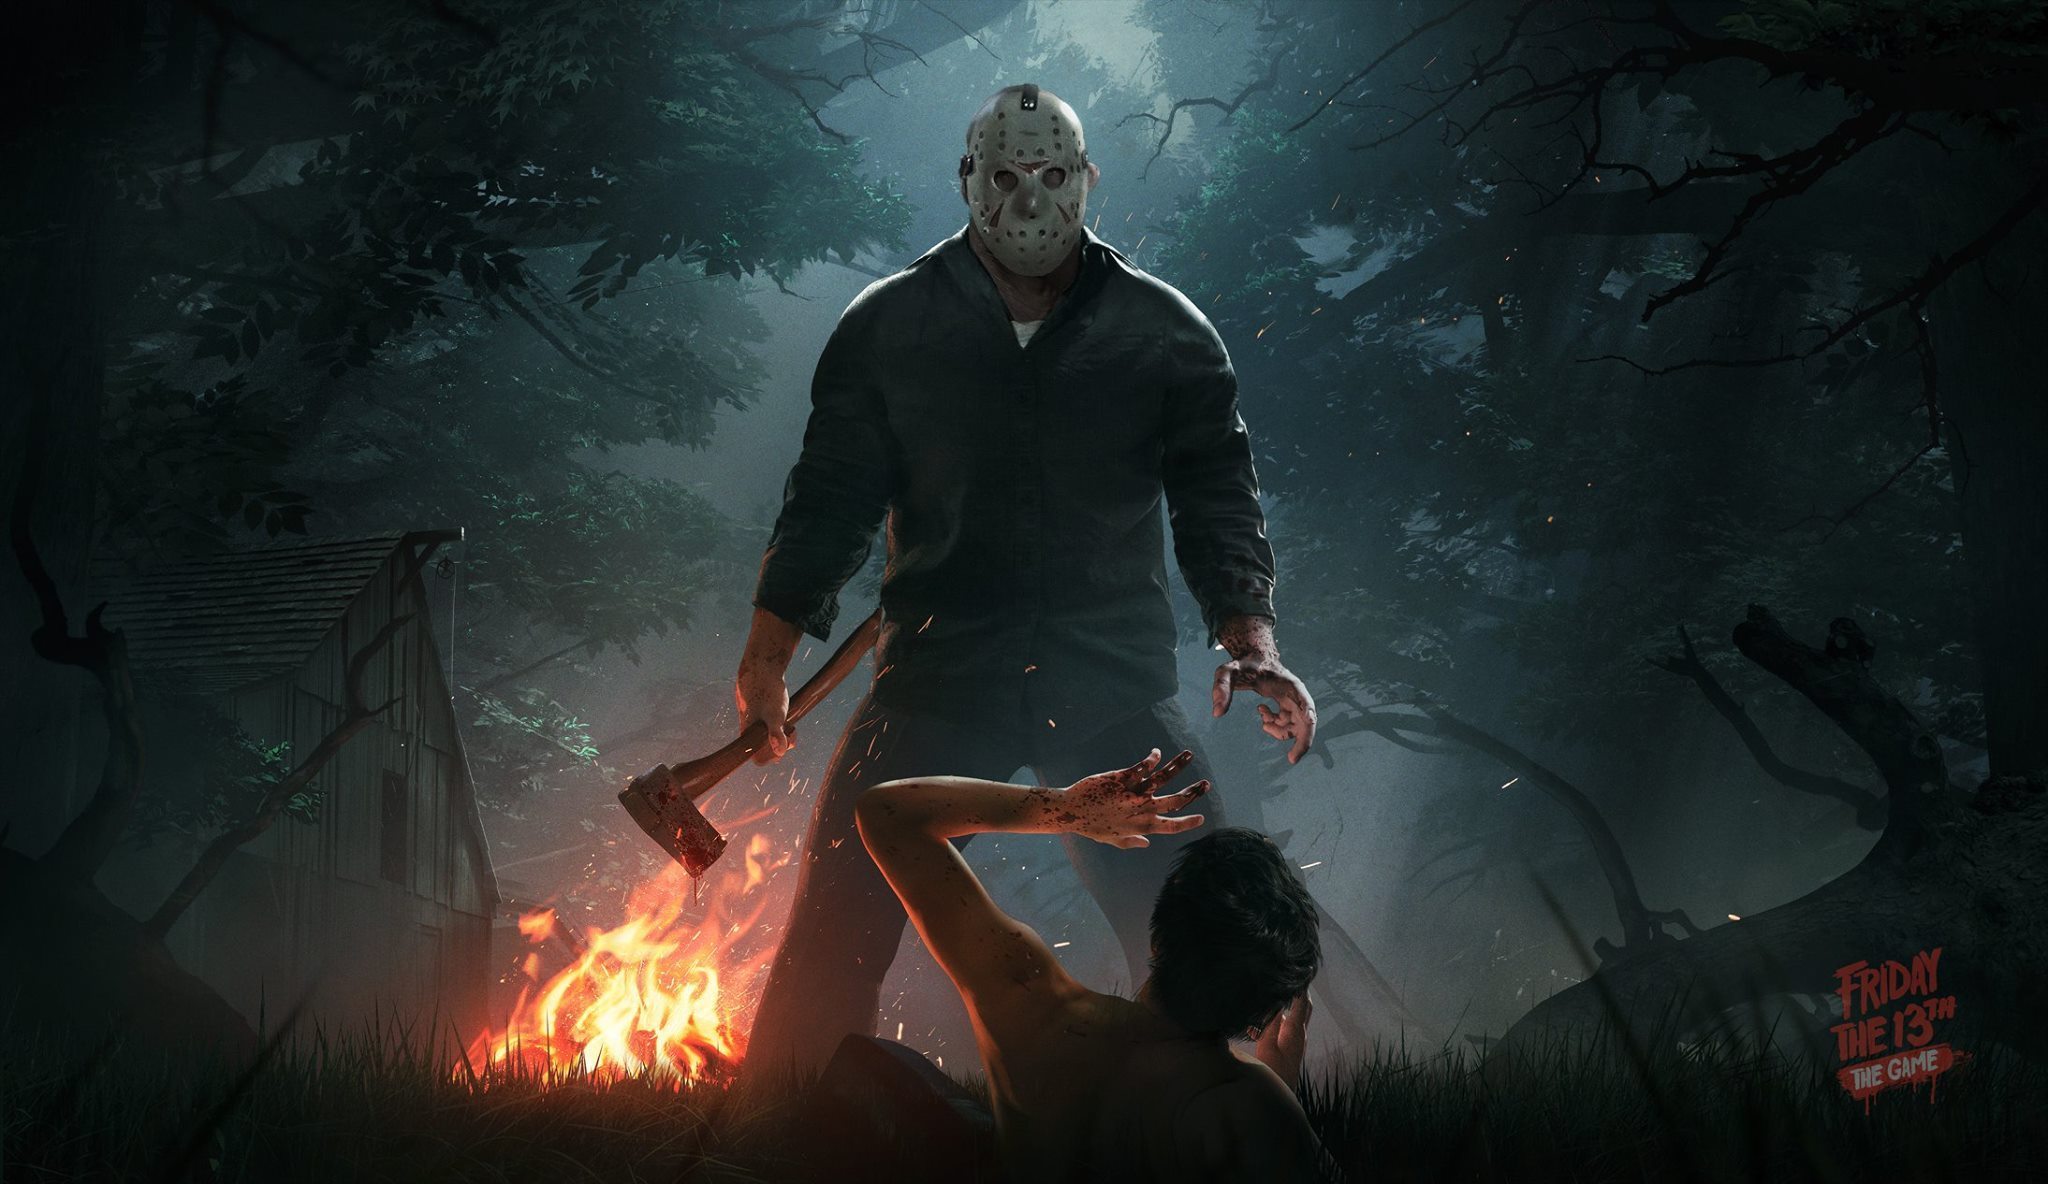 Friday the 13th: The Game.